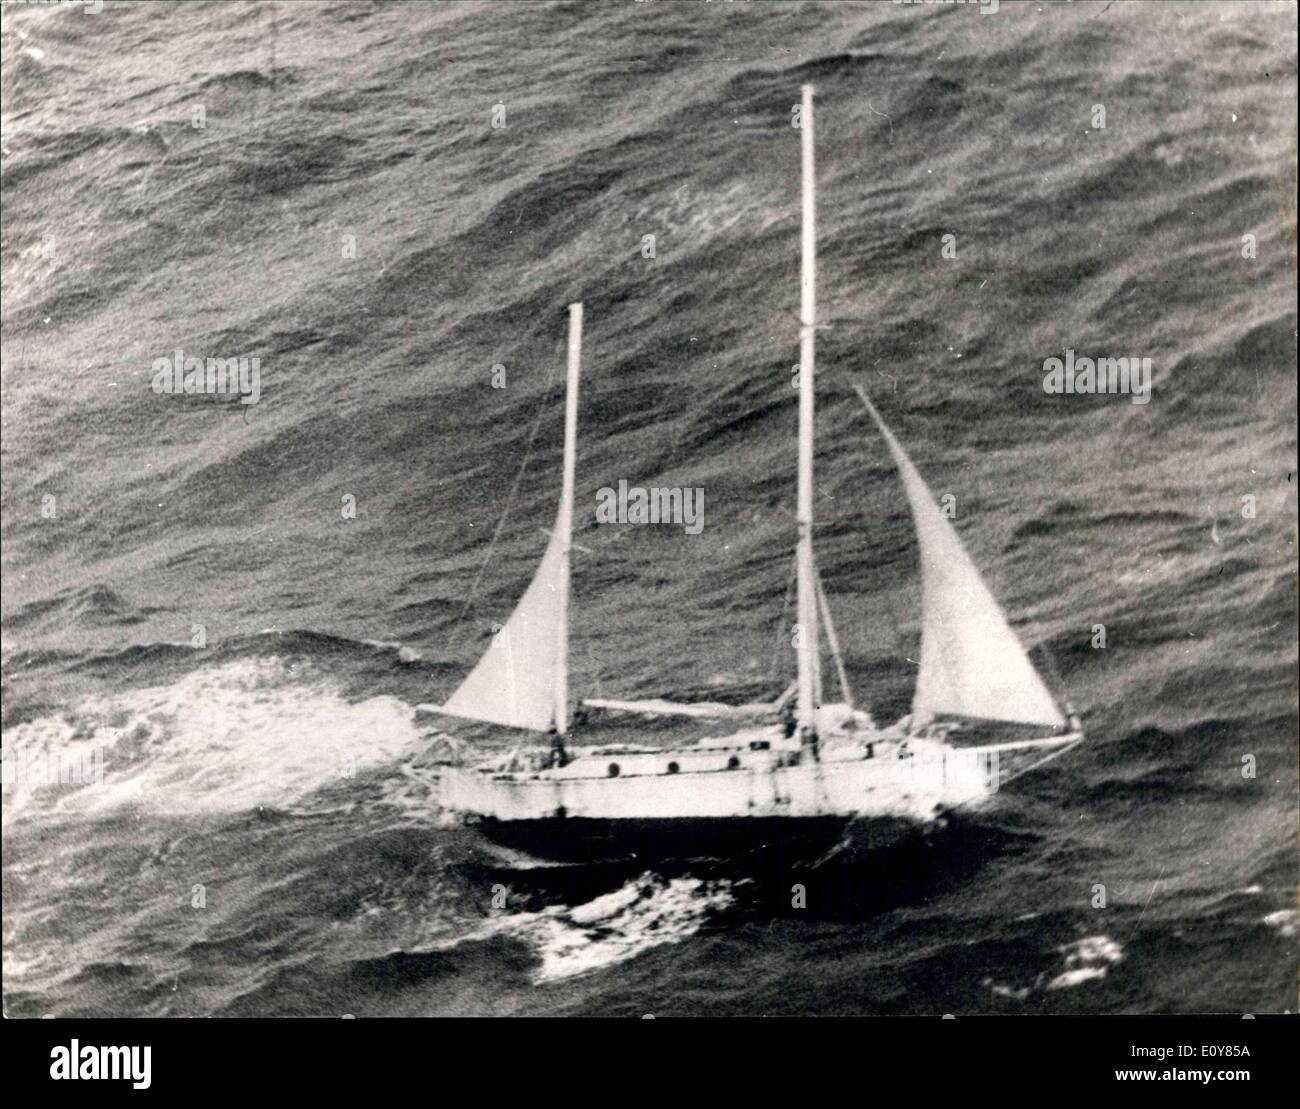 Apr. 19, 1969 - Robin The Lone Round-The-World Yachtsman Neard his Journey's End - Lanc Round-the-world yachtaman, Robin Knox-Johnston, was heading for Palmouth today and nearing his journey's end. The 30-year-old yachteman's 32-foot ketch Suhaili was about 100-miles off Land's End on the last leg of his non-stop voyage round the World. Today he was spending his 309th day of solitary confinement is the craft that has takes him 30,000-miles. It is almost certain that Robin will be the first man home in the race oganced by the Sunday Times Newspaper Stock Photo